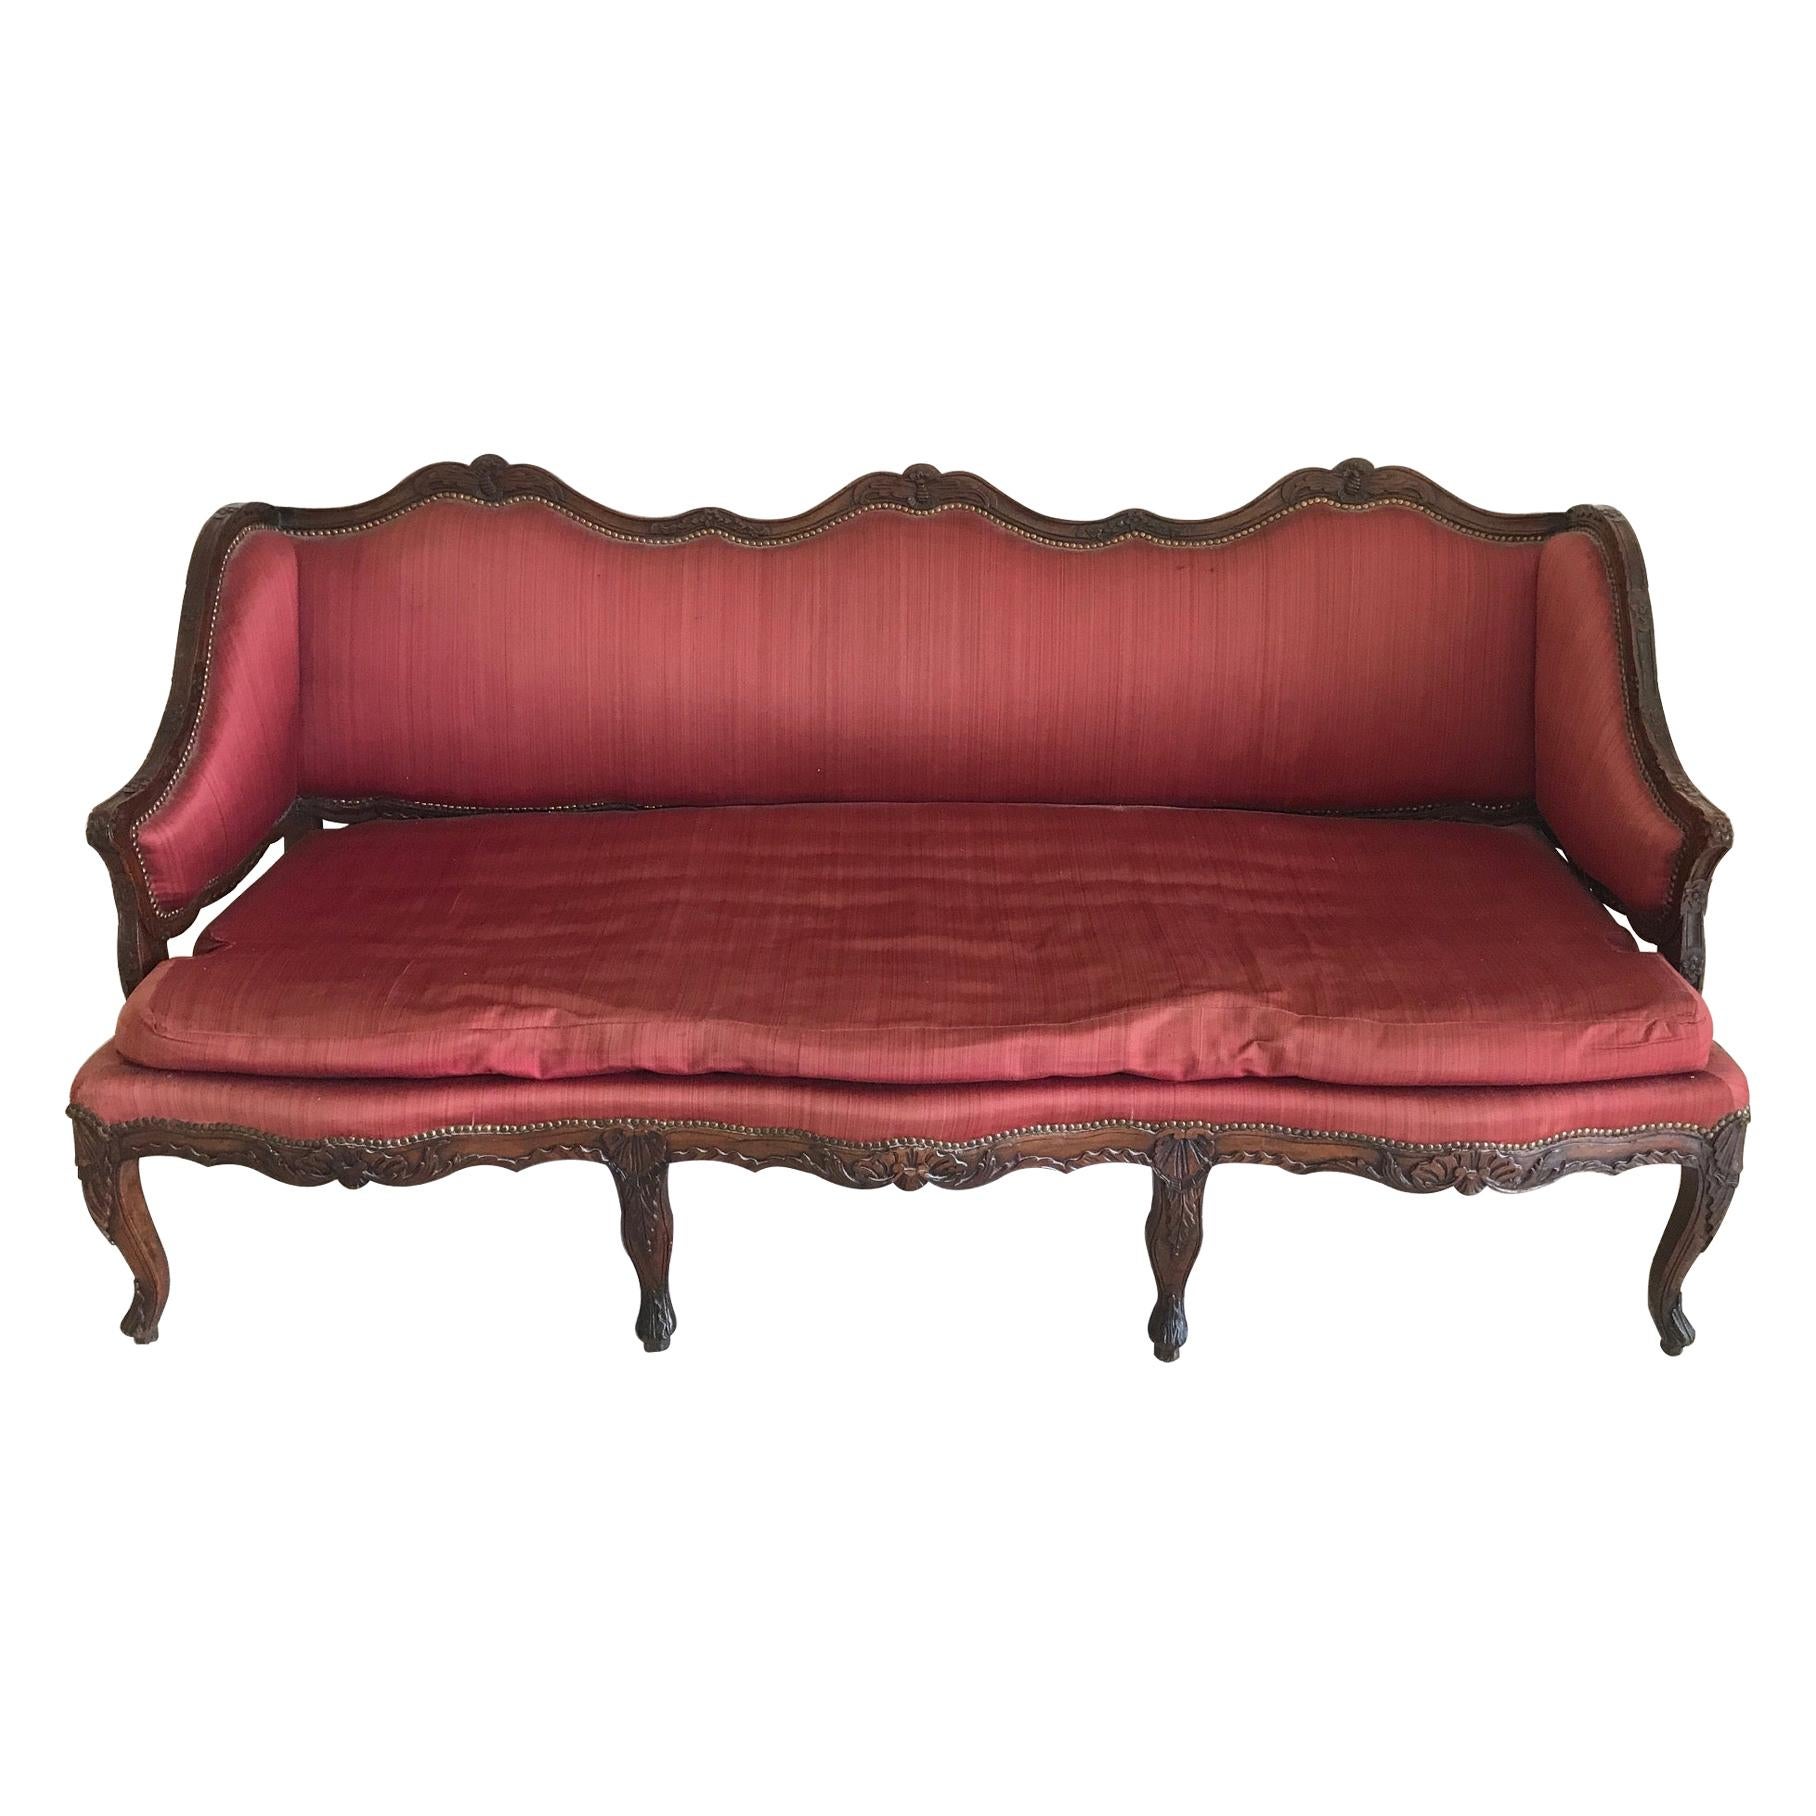 French Early 18th Century Sofa